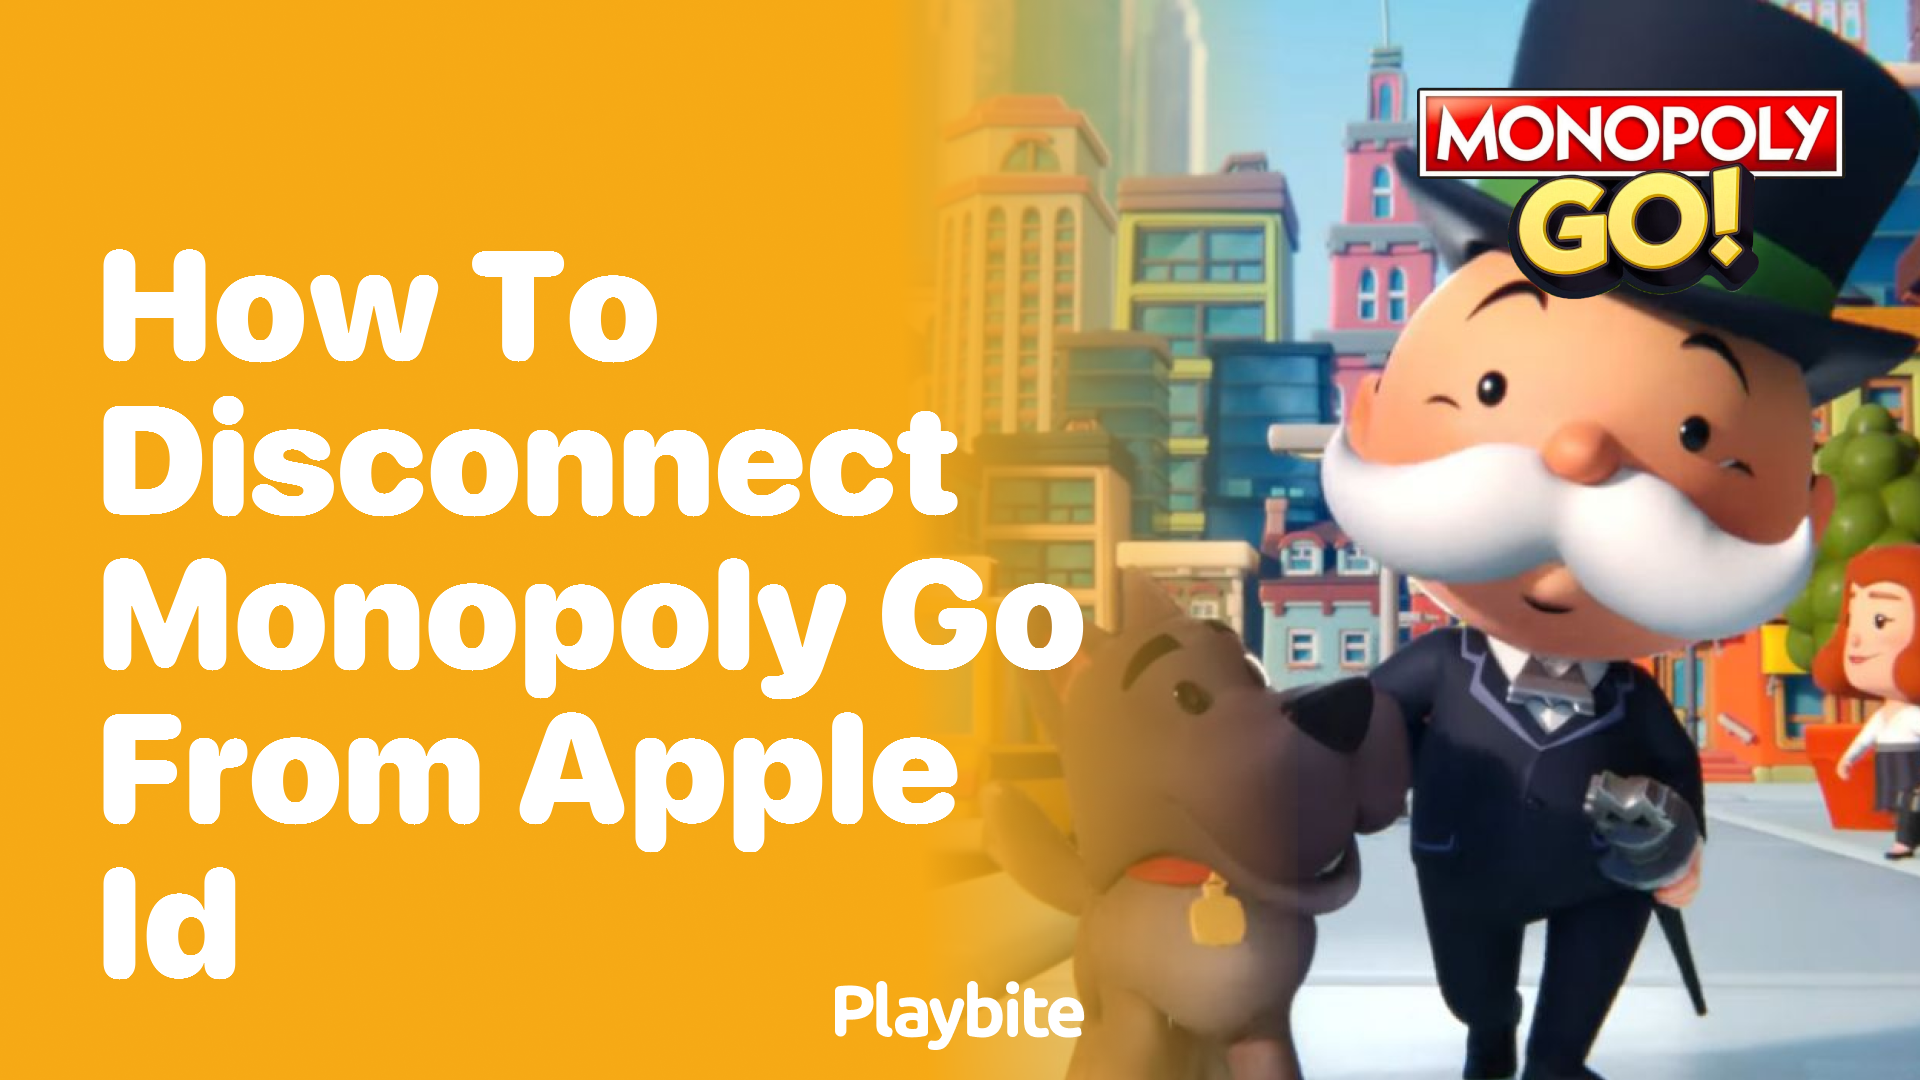 How to Disconnect Monopoly Go from Your Apple ID